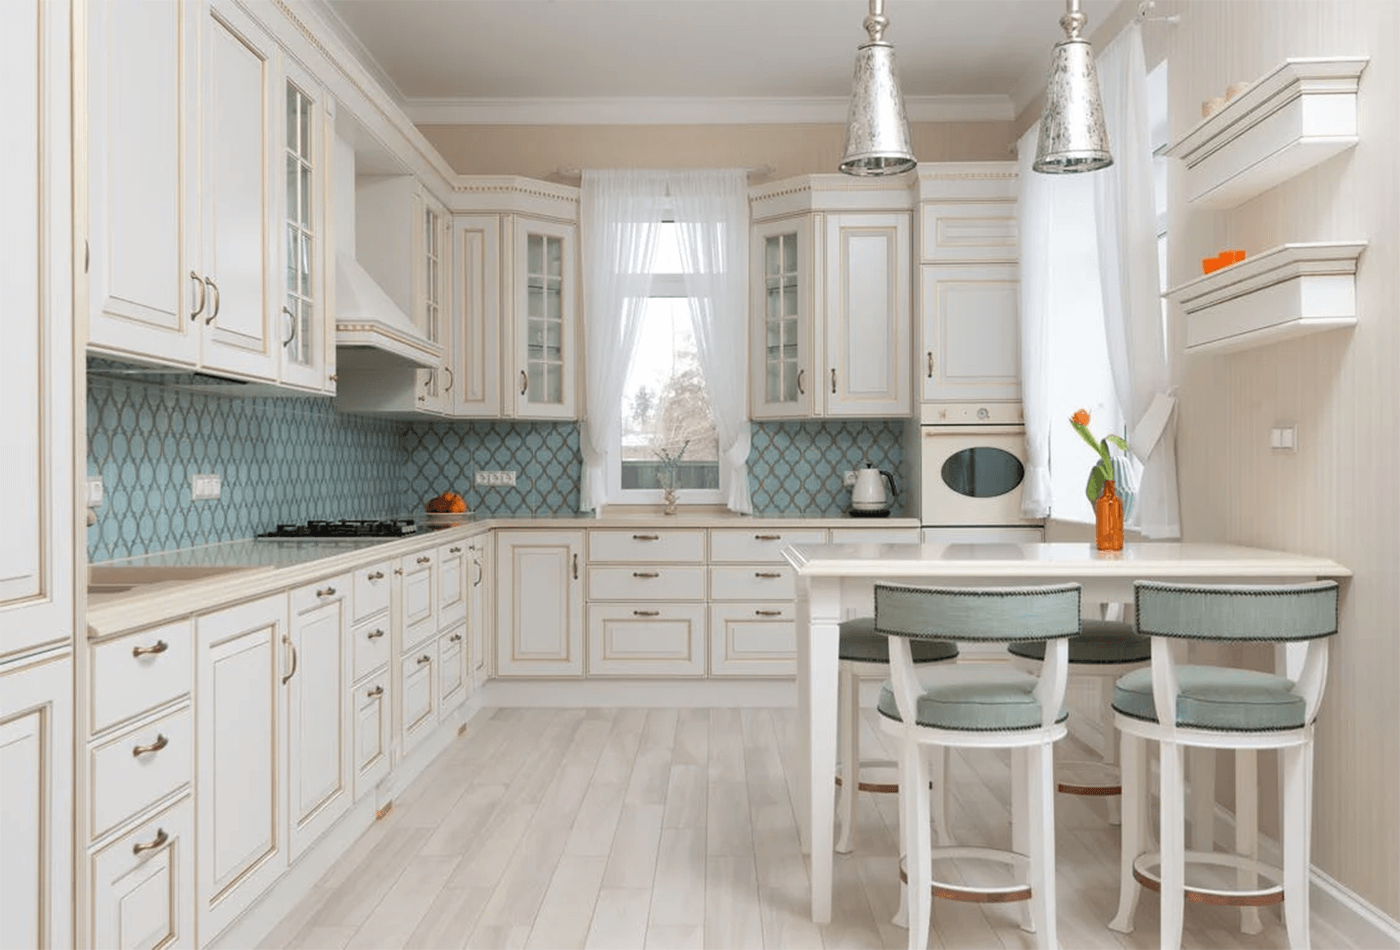 Matching Cabinets And Walls